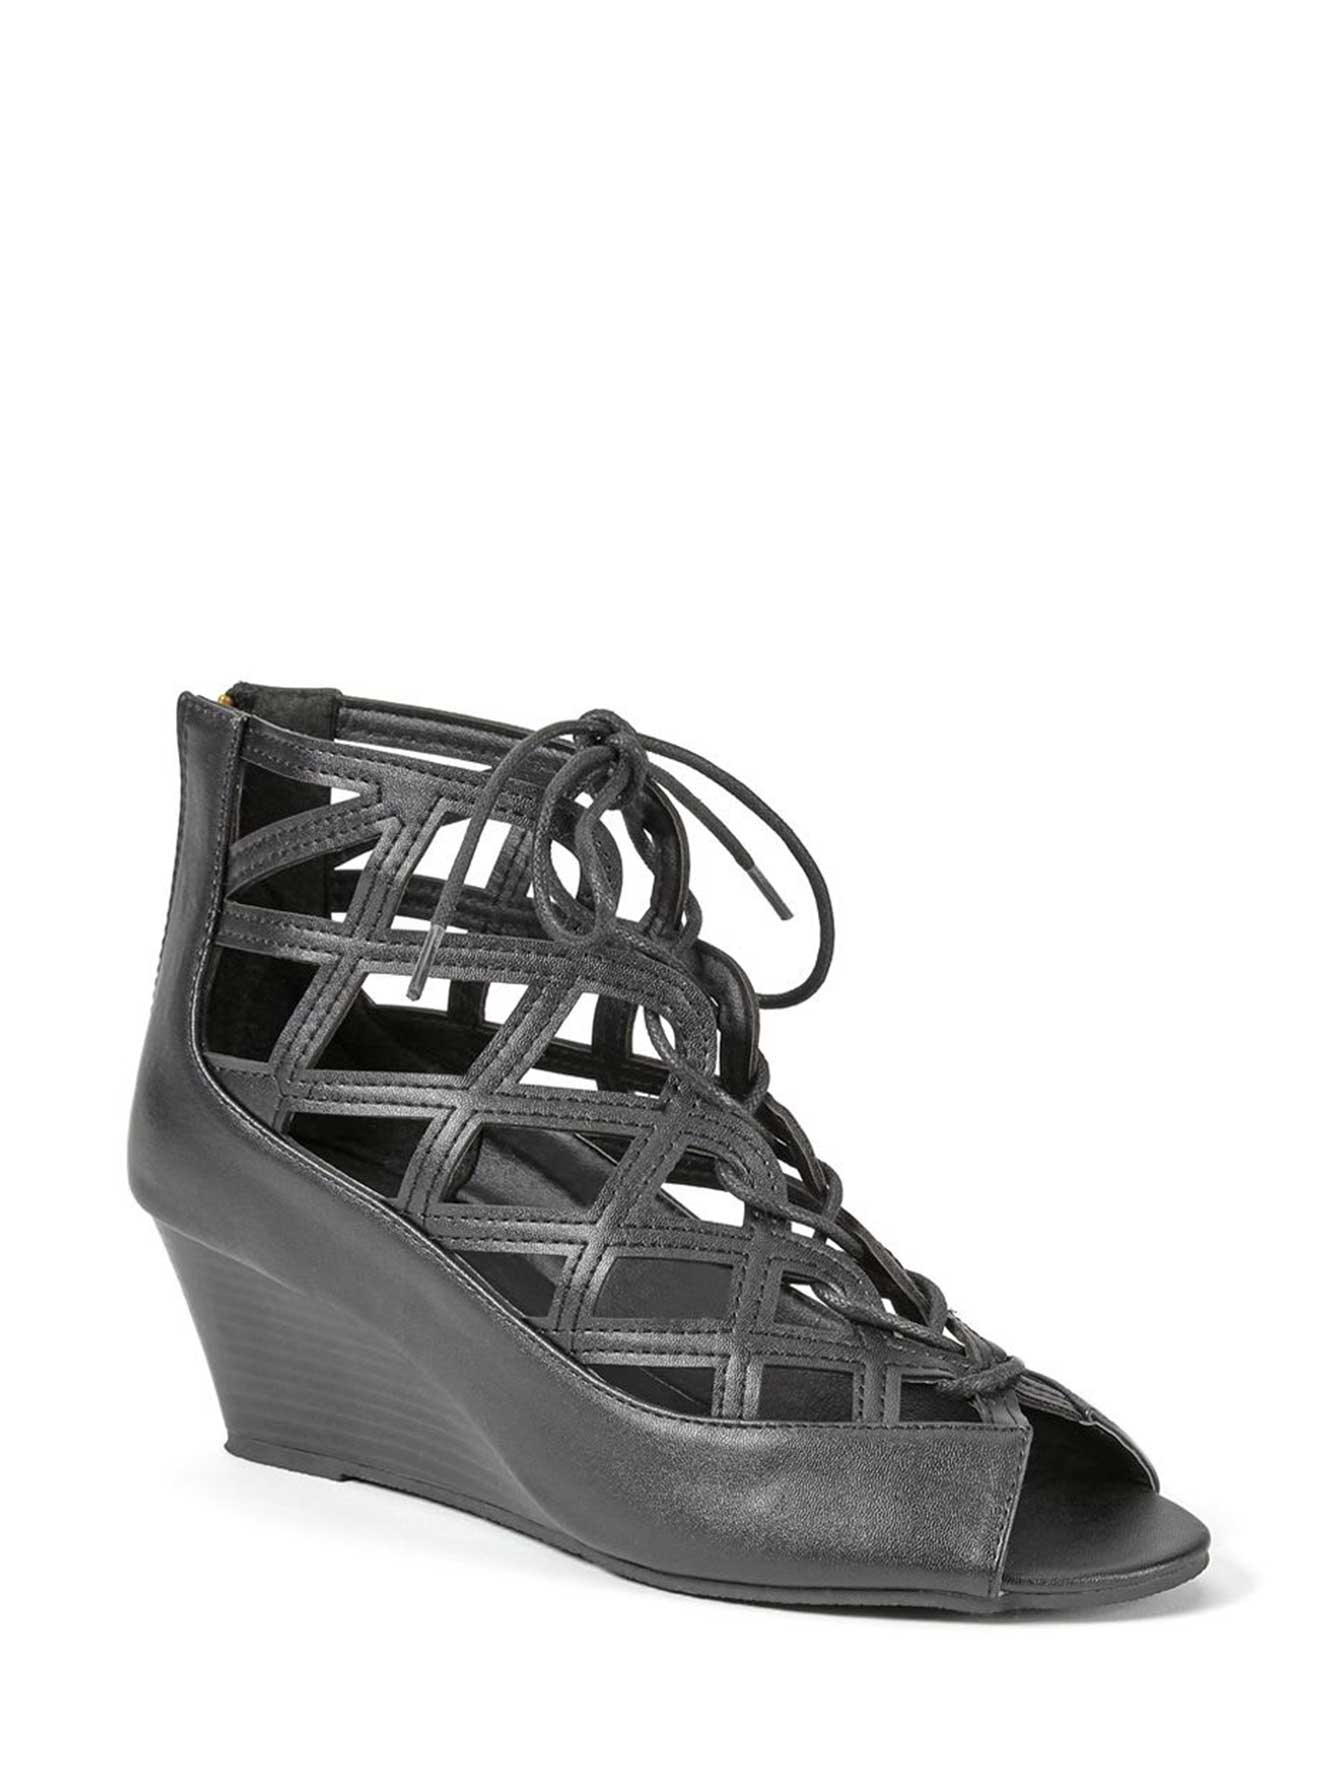 Wide-Width Lace Up Wedge Shoes | Penningtons